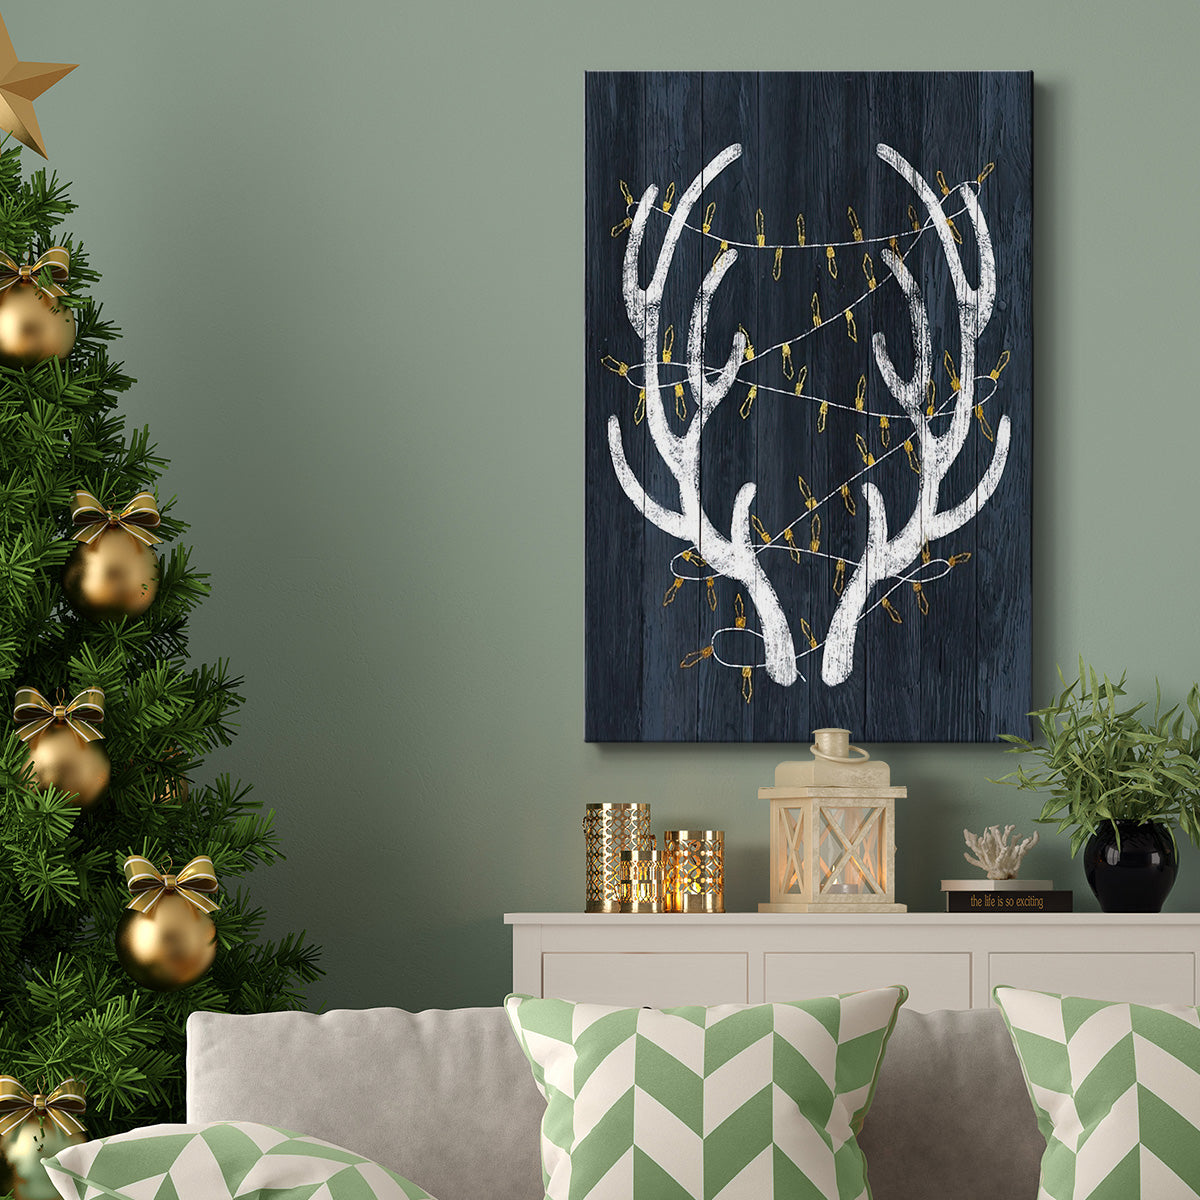 Antlers & Lights - Gallery Wrapped Canvas